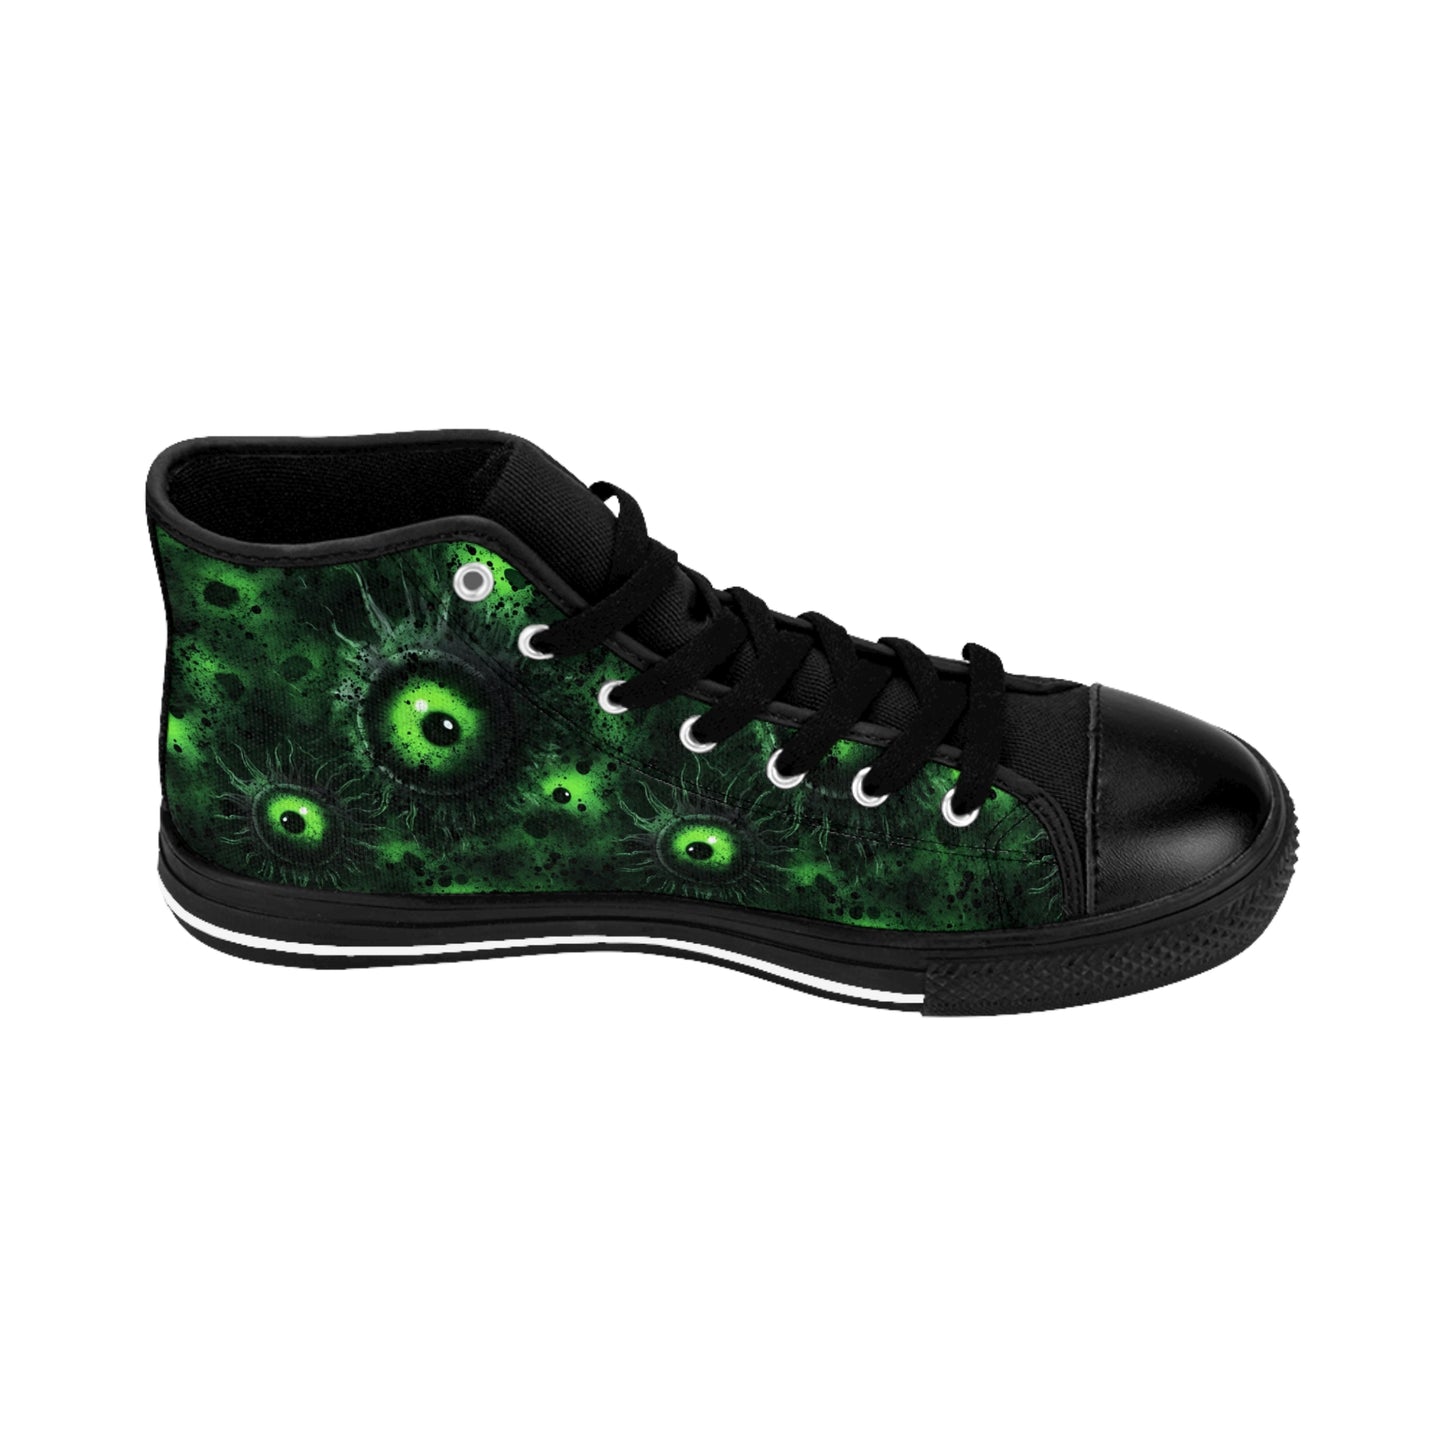 Classic Sneakers Greeny Lurking Eyes - Frogos Design